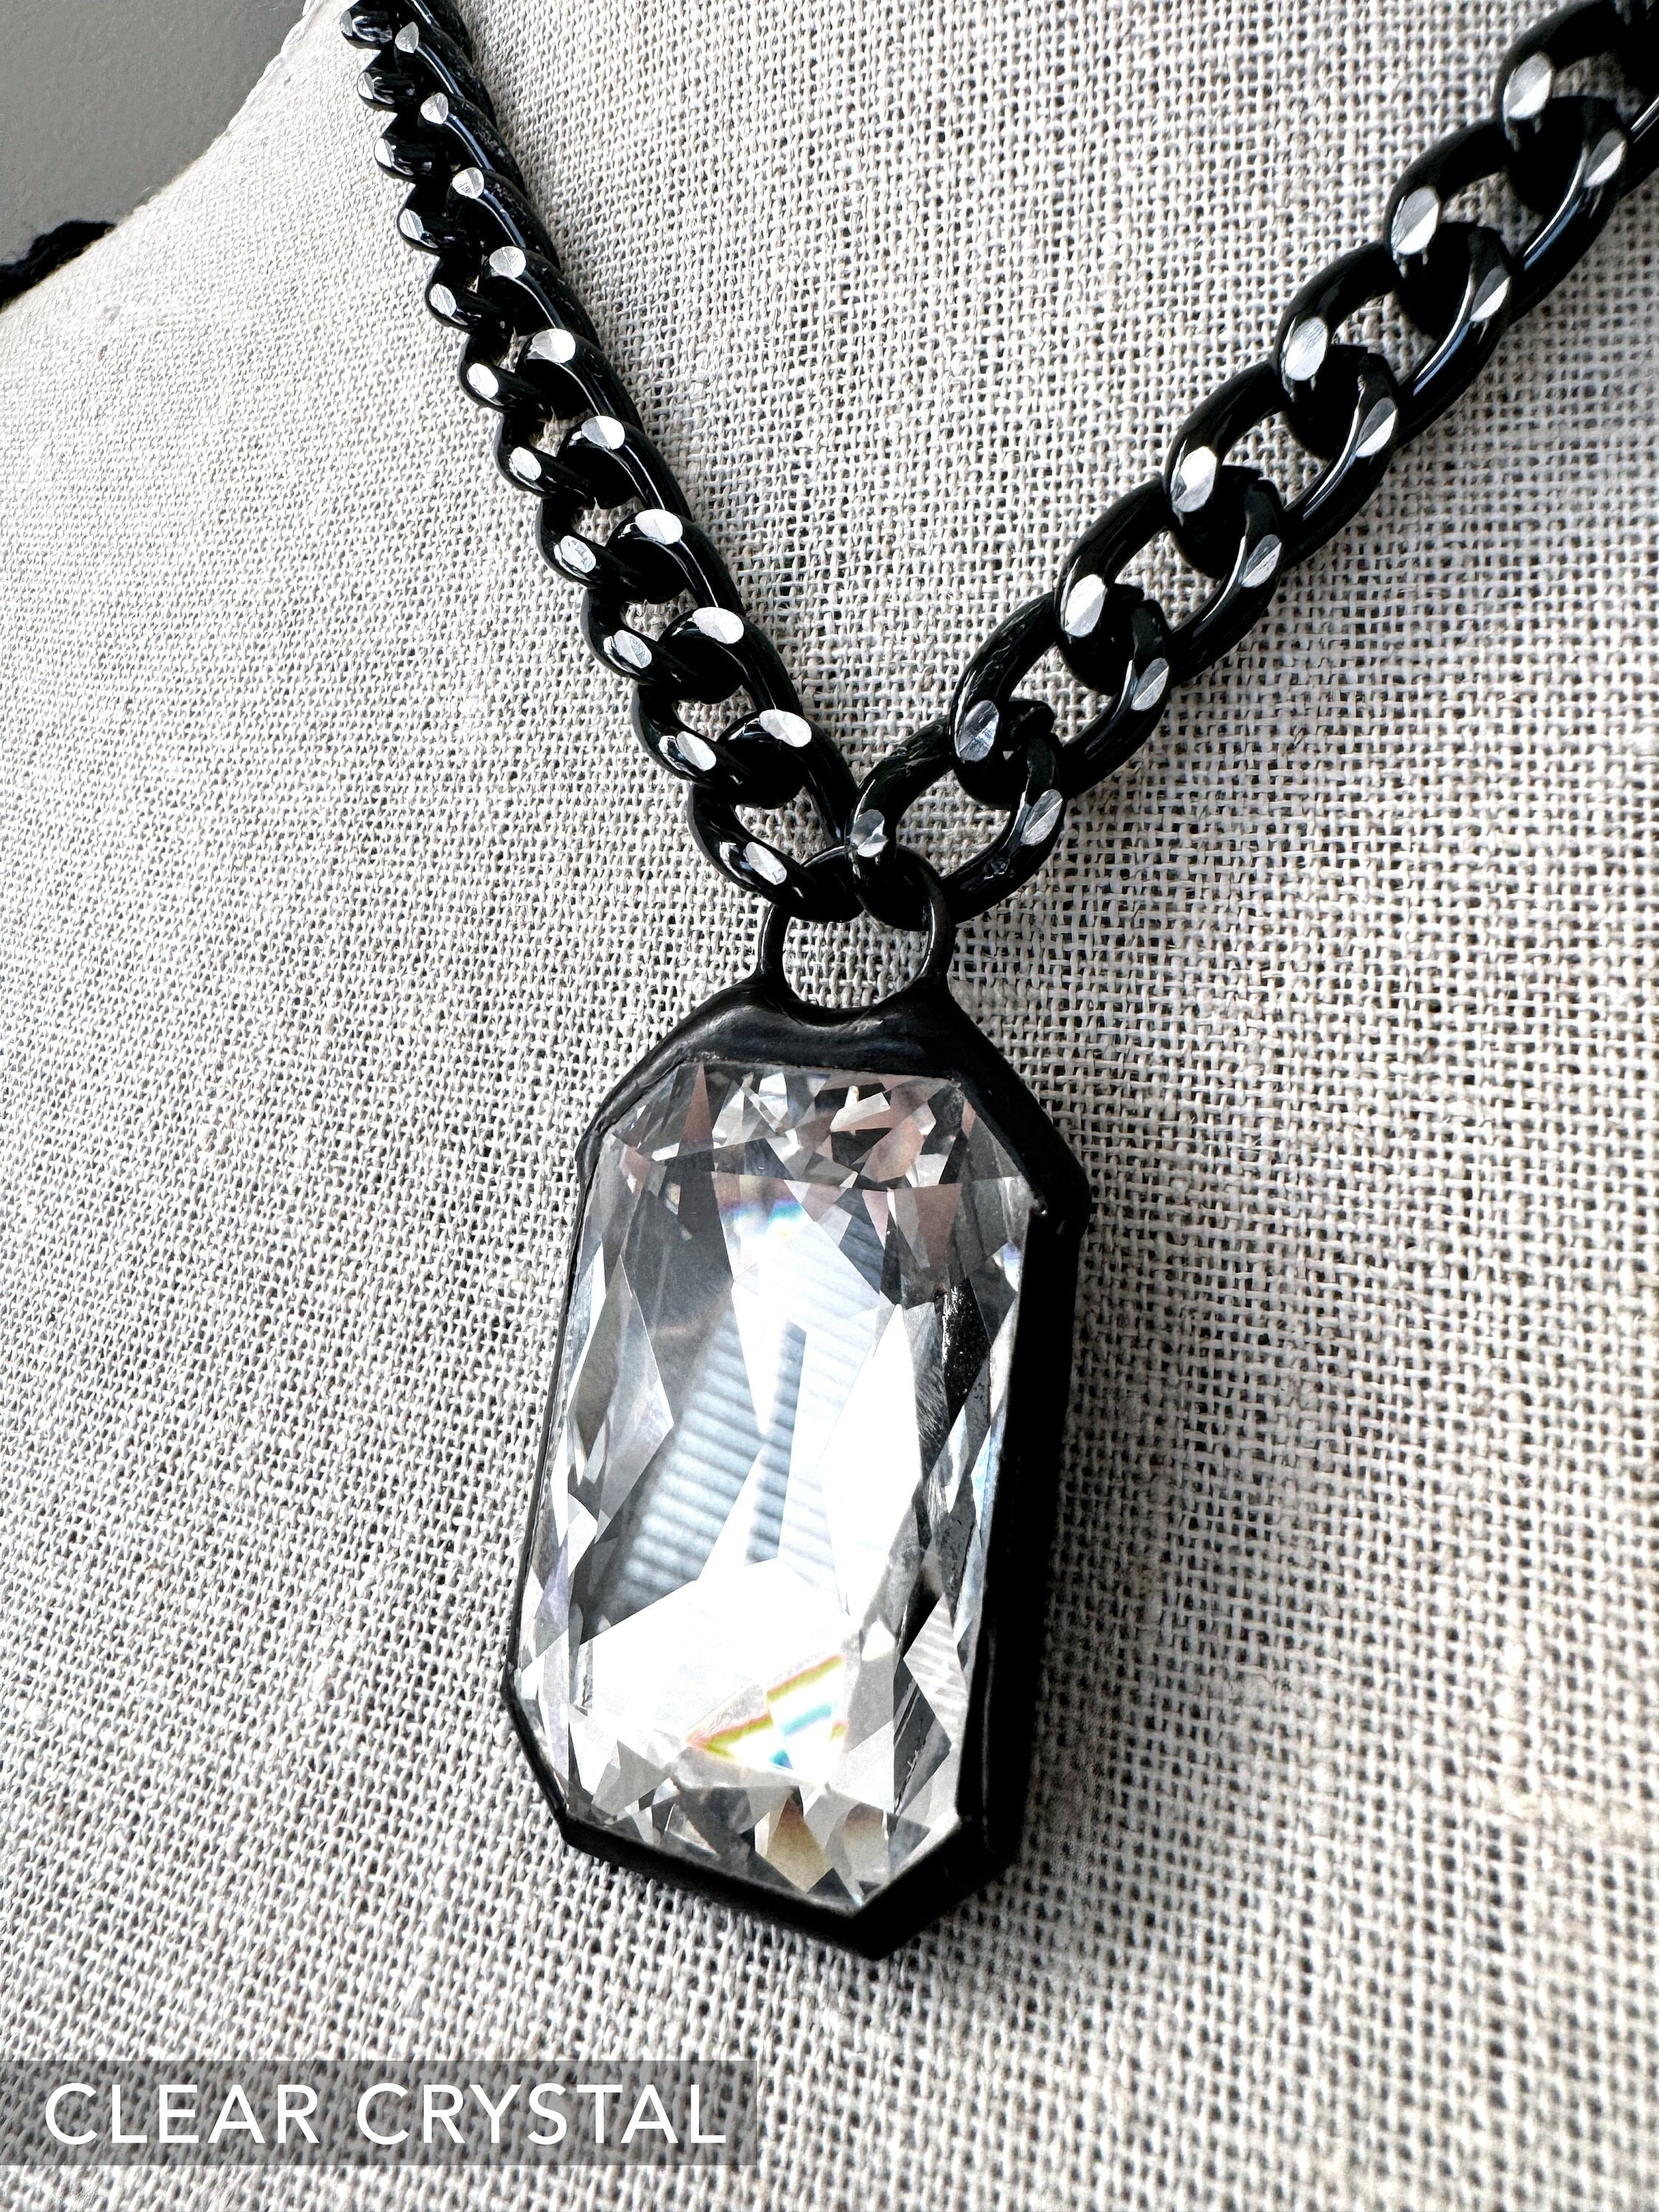 EMERGE - Large Clear Crystal Pendant Necklace, Thick Silver Black Chain, Hand Soldered Black Bezel - Bold Statement Necklace, Modern Jewelry